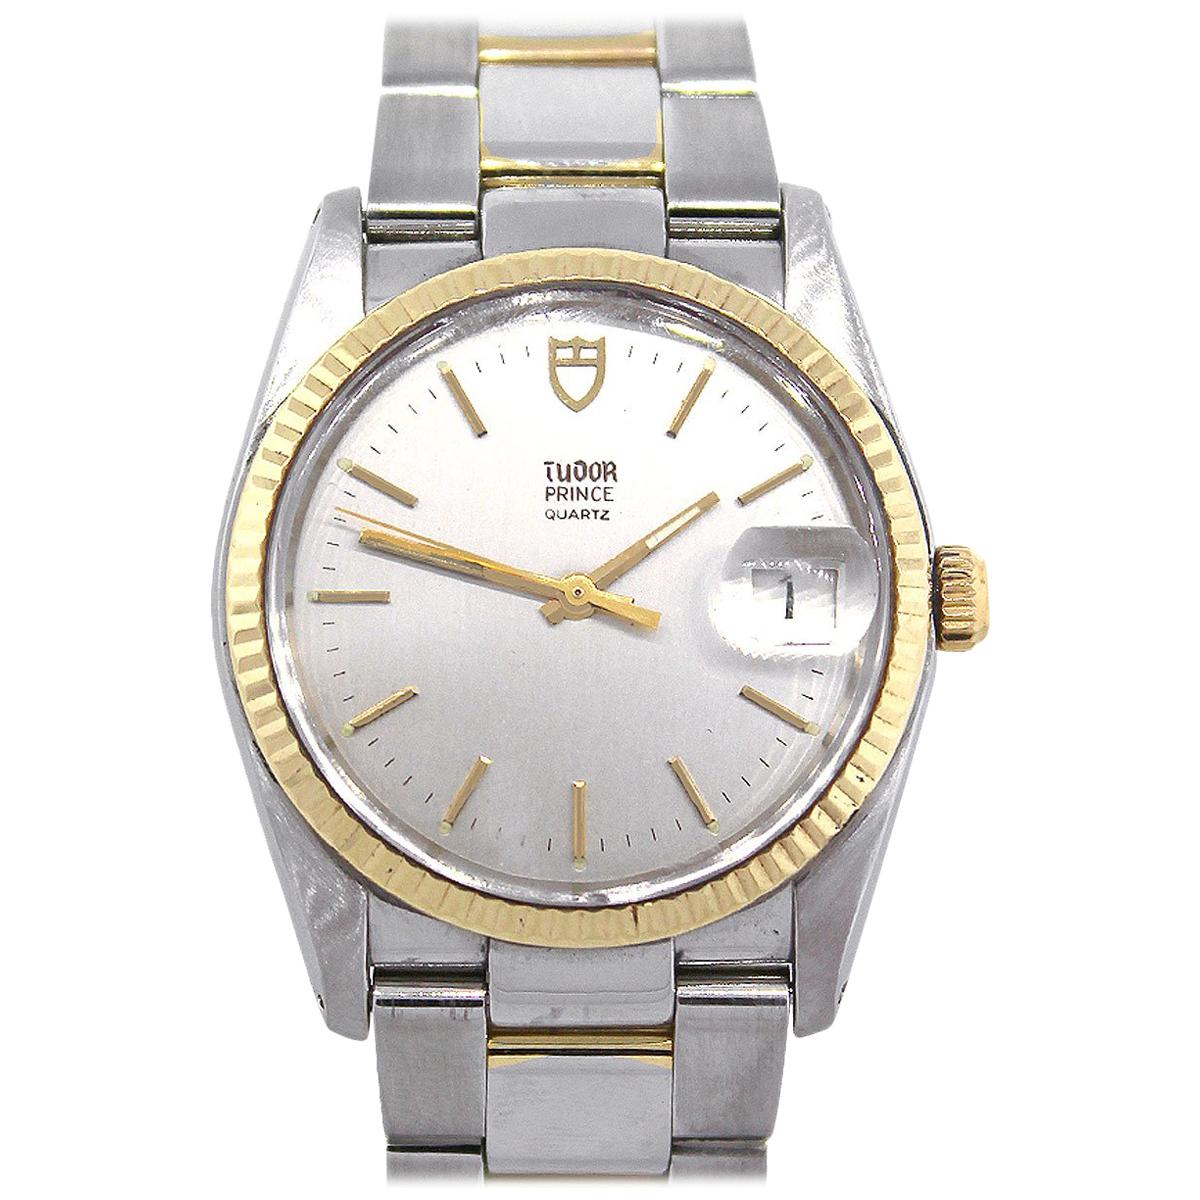 Tudor 91533 Prince Oysterdate Silver Dial Watch